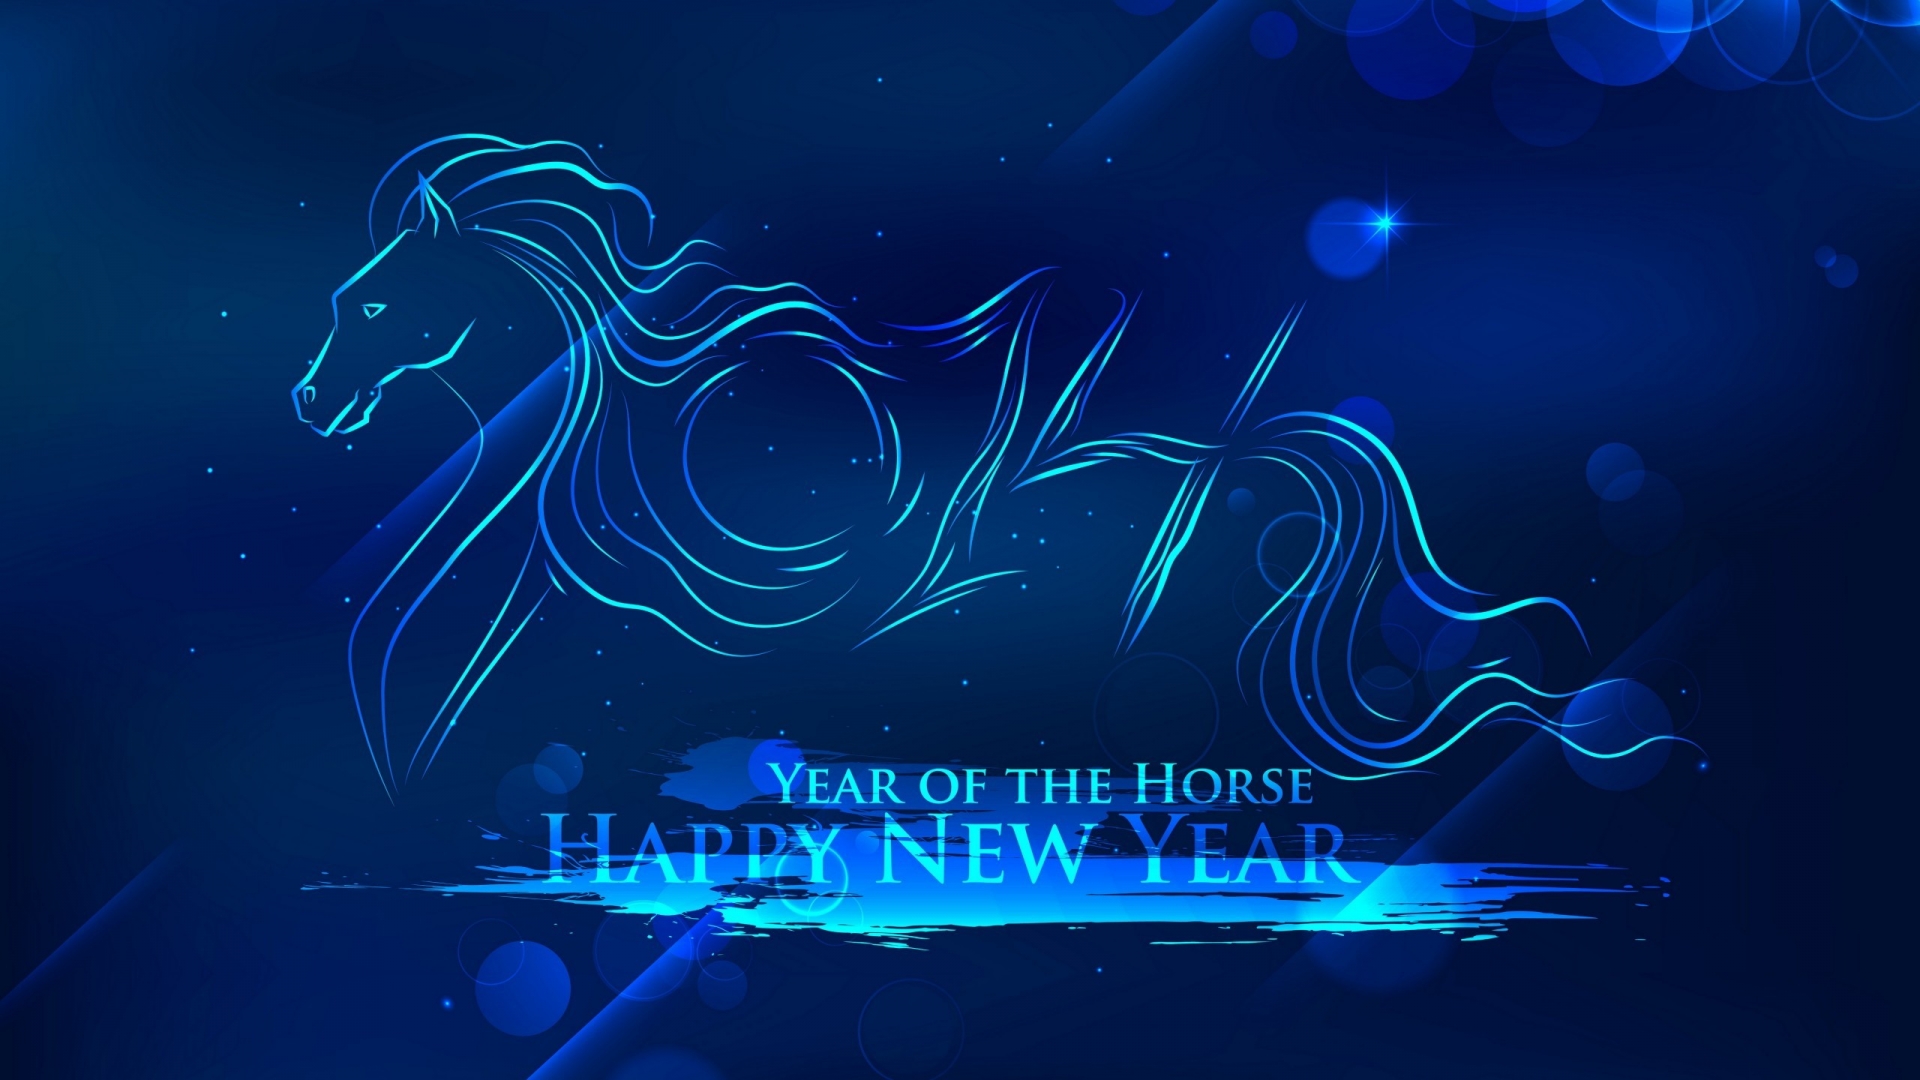 2014 Horse Year for 1920 x 1080 HDTV 1080p resolution